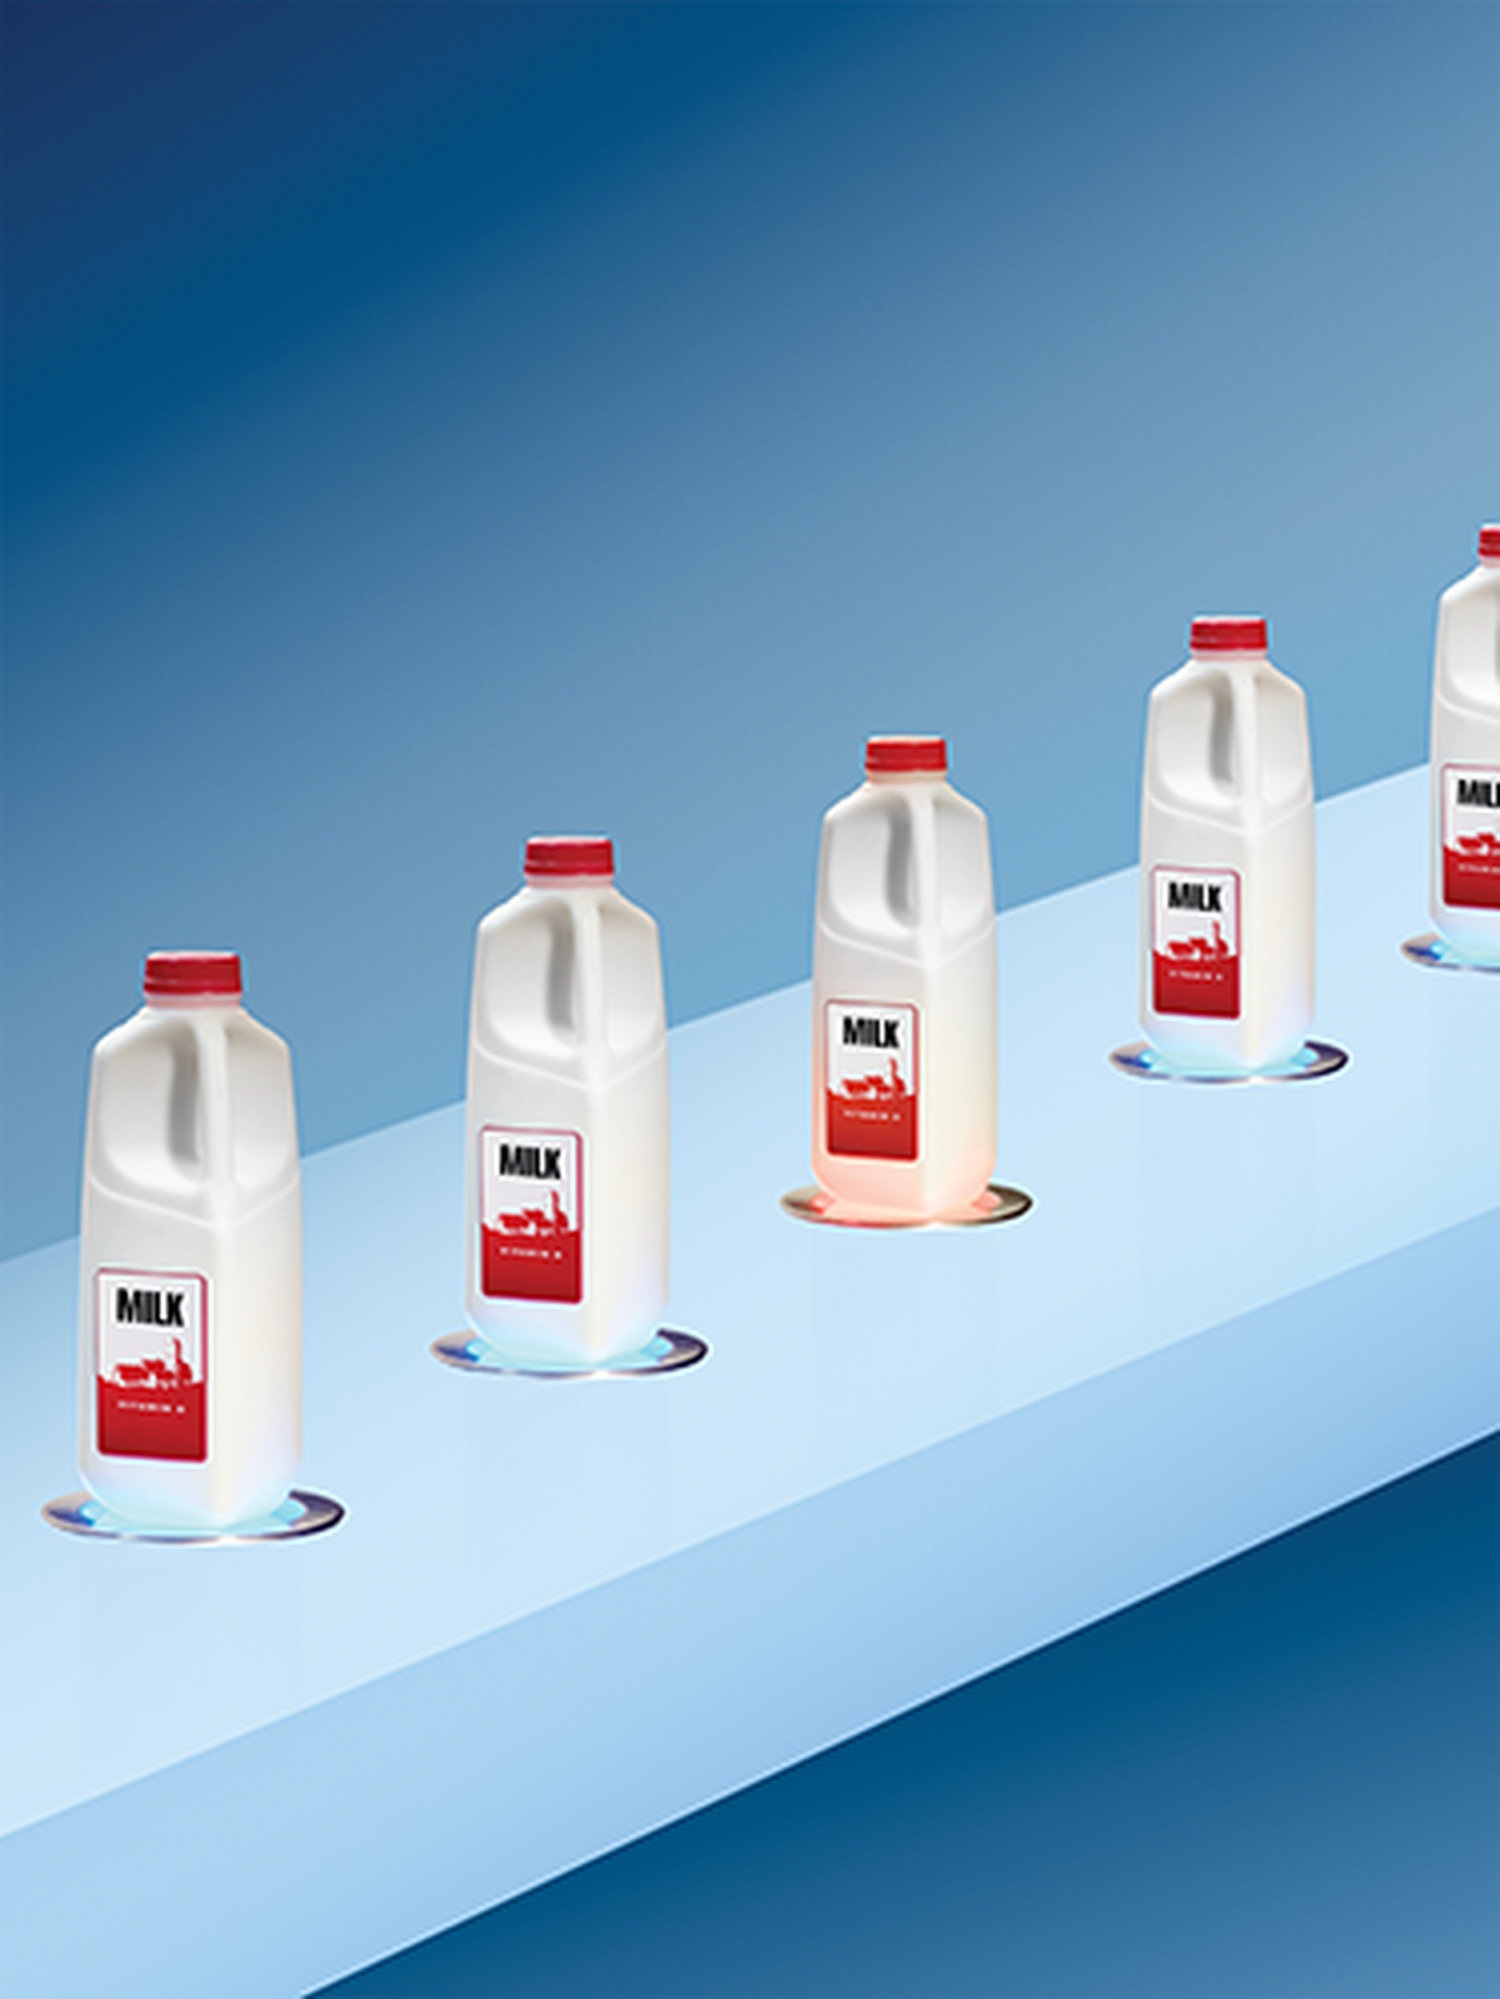 Line of milk bottles with one showing itself as being spoiled